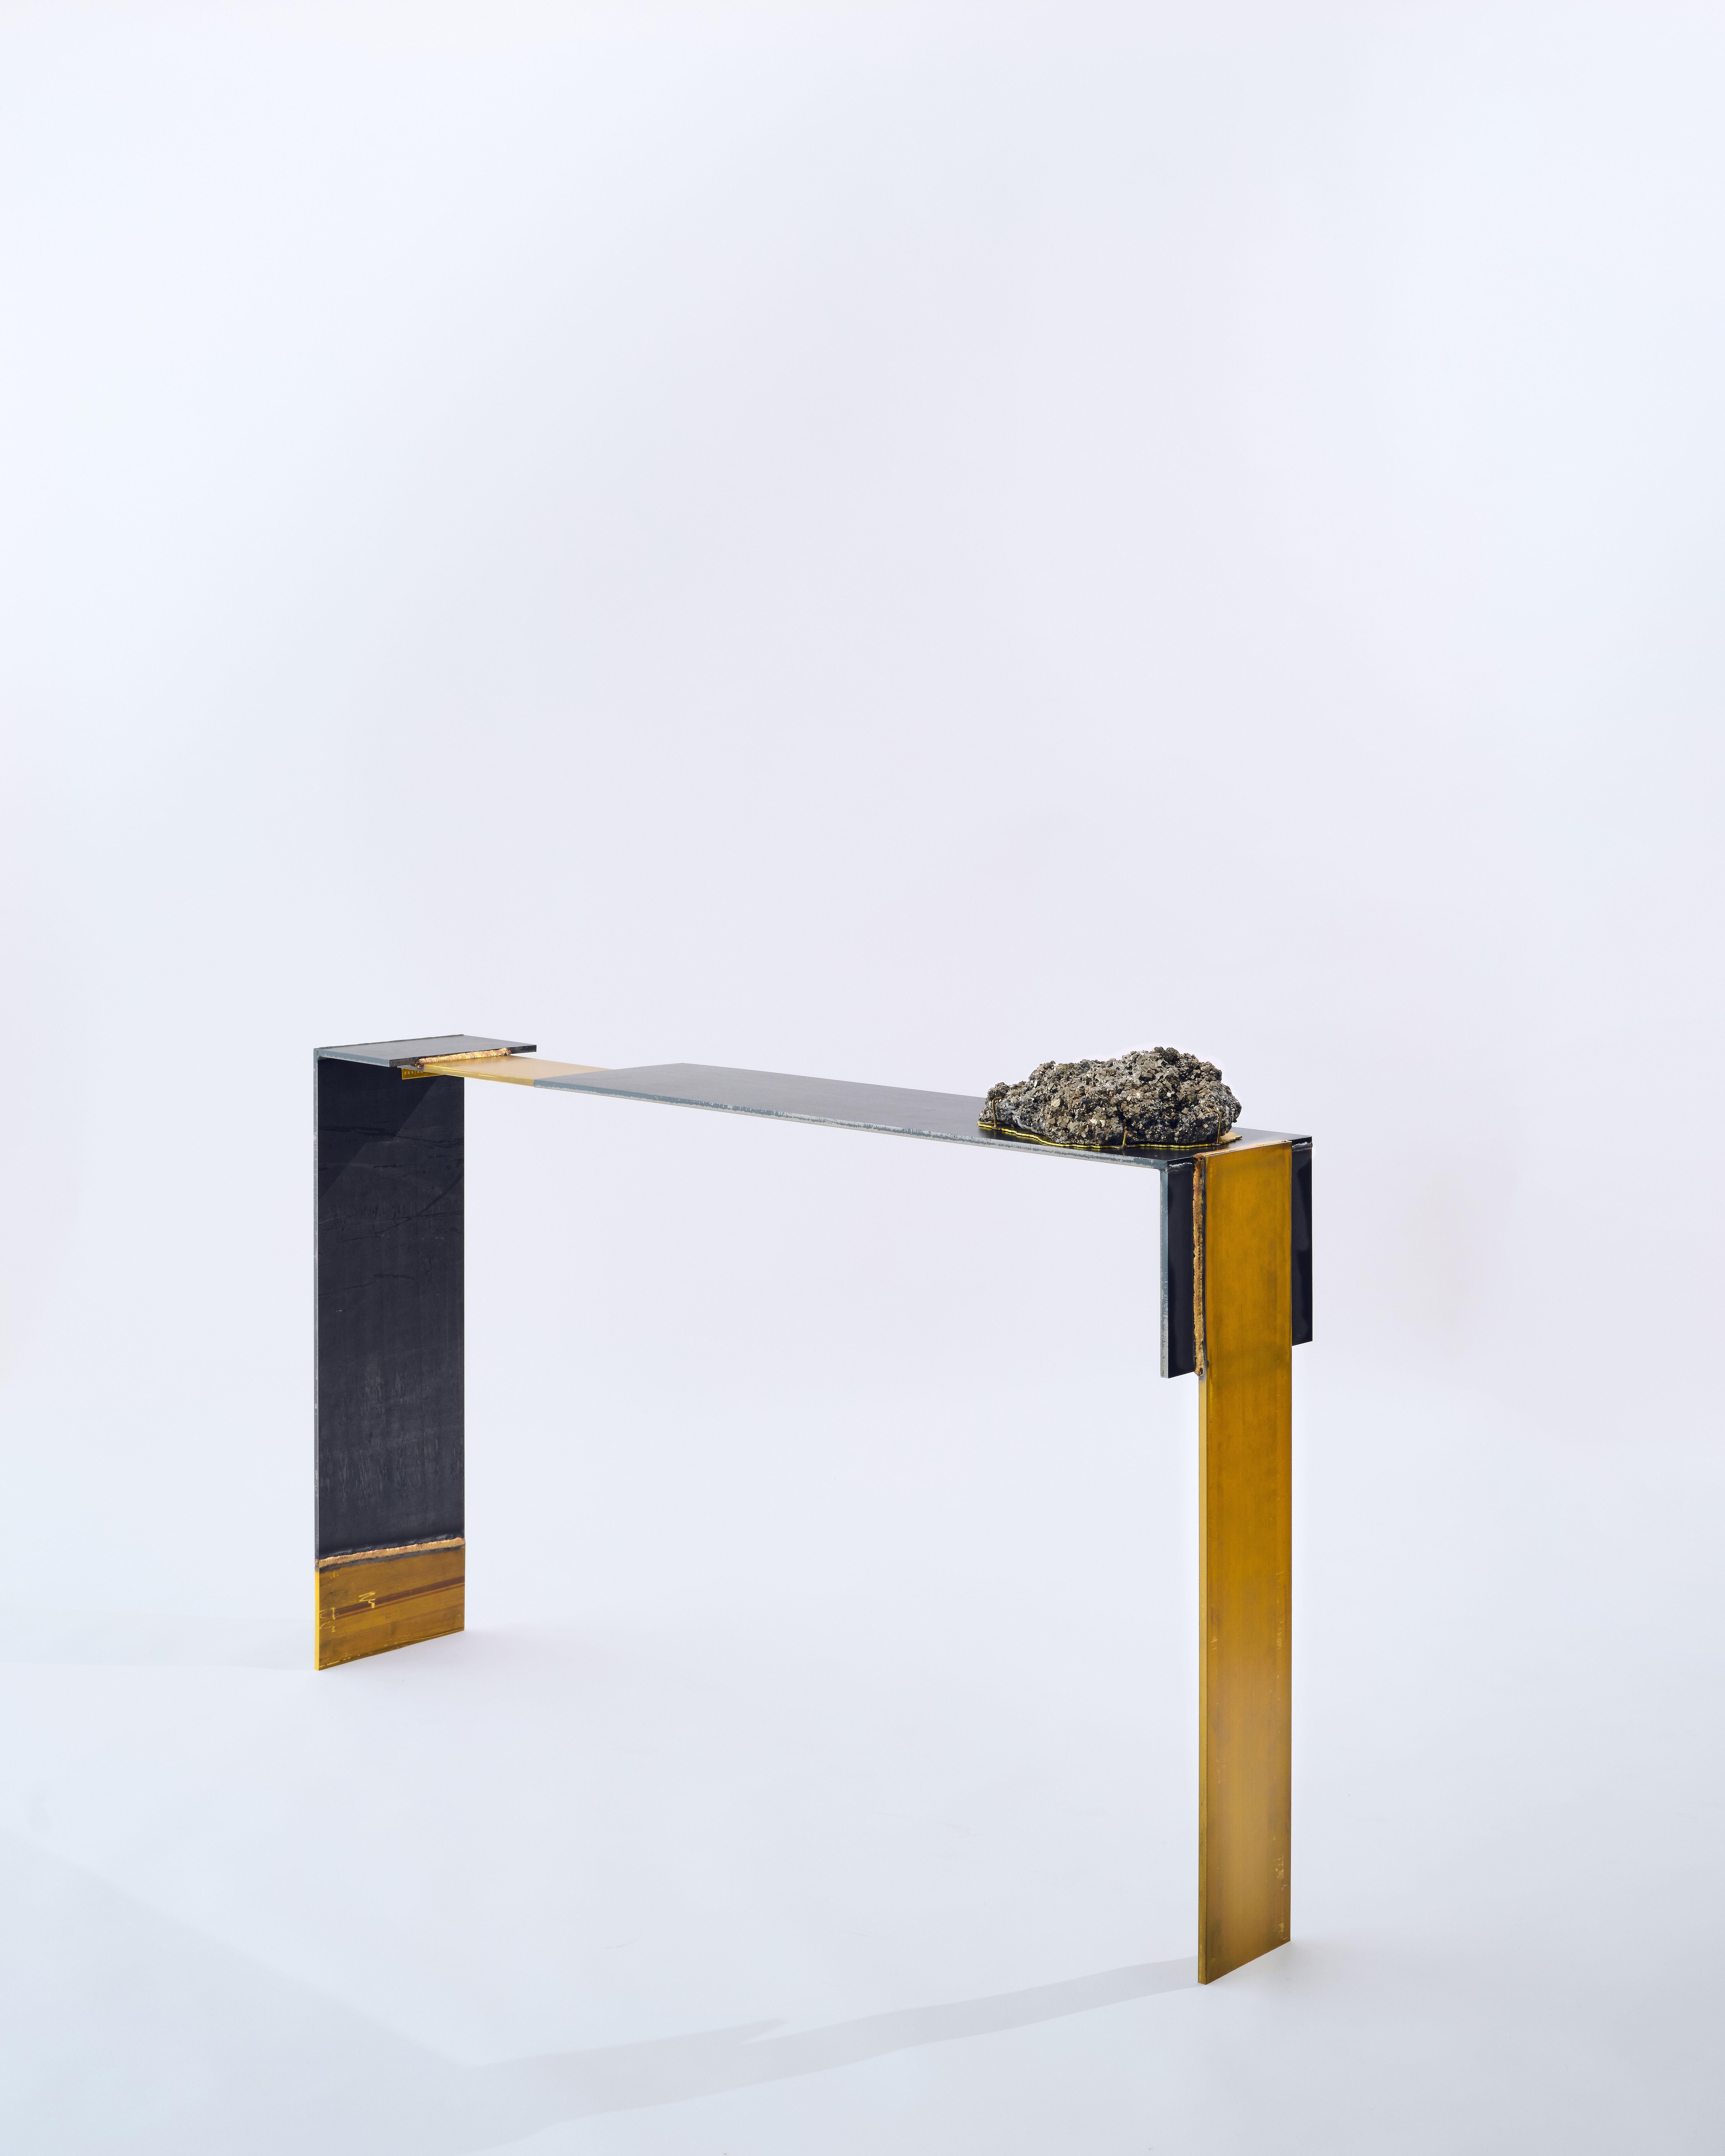 Pyrite Consolte table 1 by Brajak Vitberg
Dimensions: D 100 x W 25 x H 85 cm
Materials: Dichroic glass, metal fixture details

Bijelic and Brajak are two architects from Ljubljana, Slovenia.
They are striving to design craft elements and make